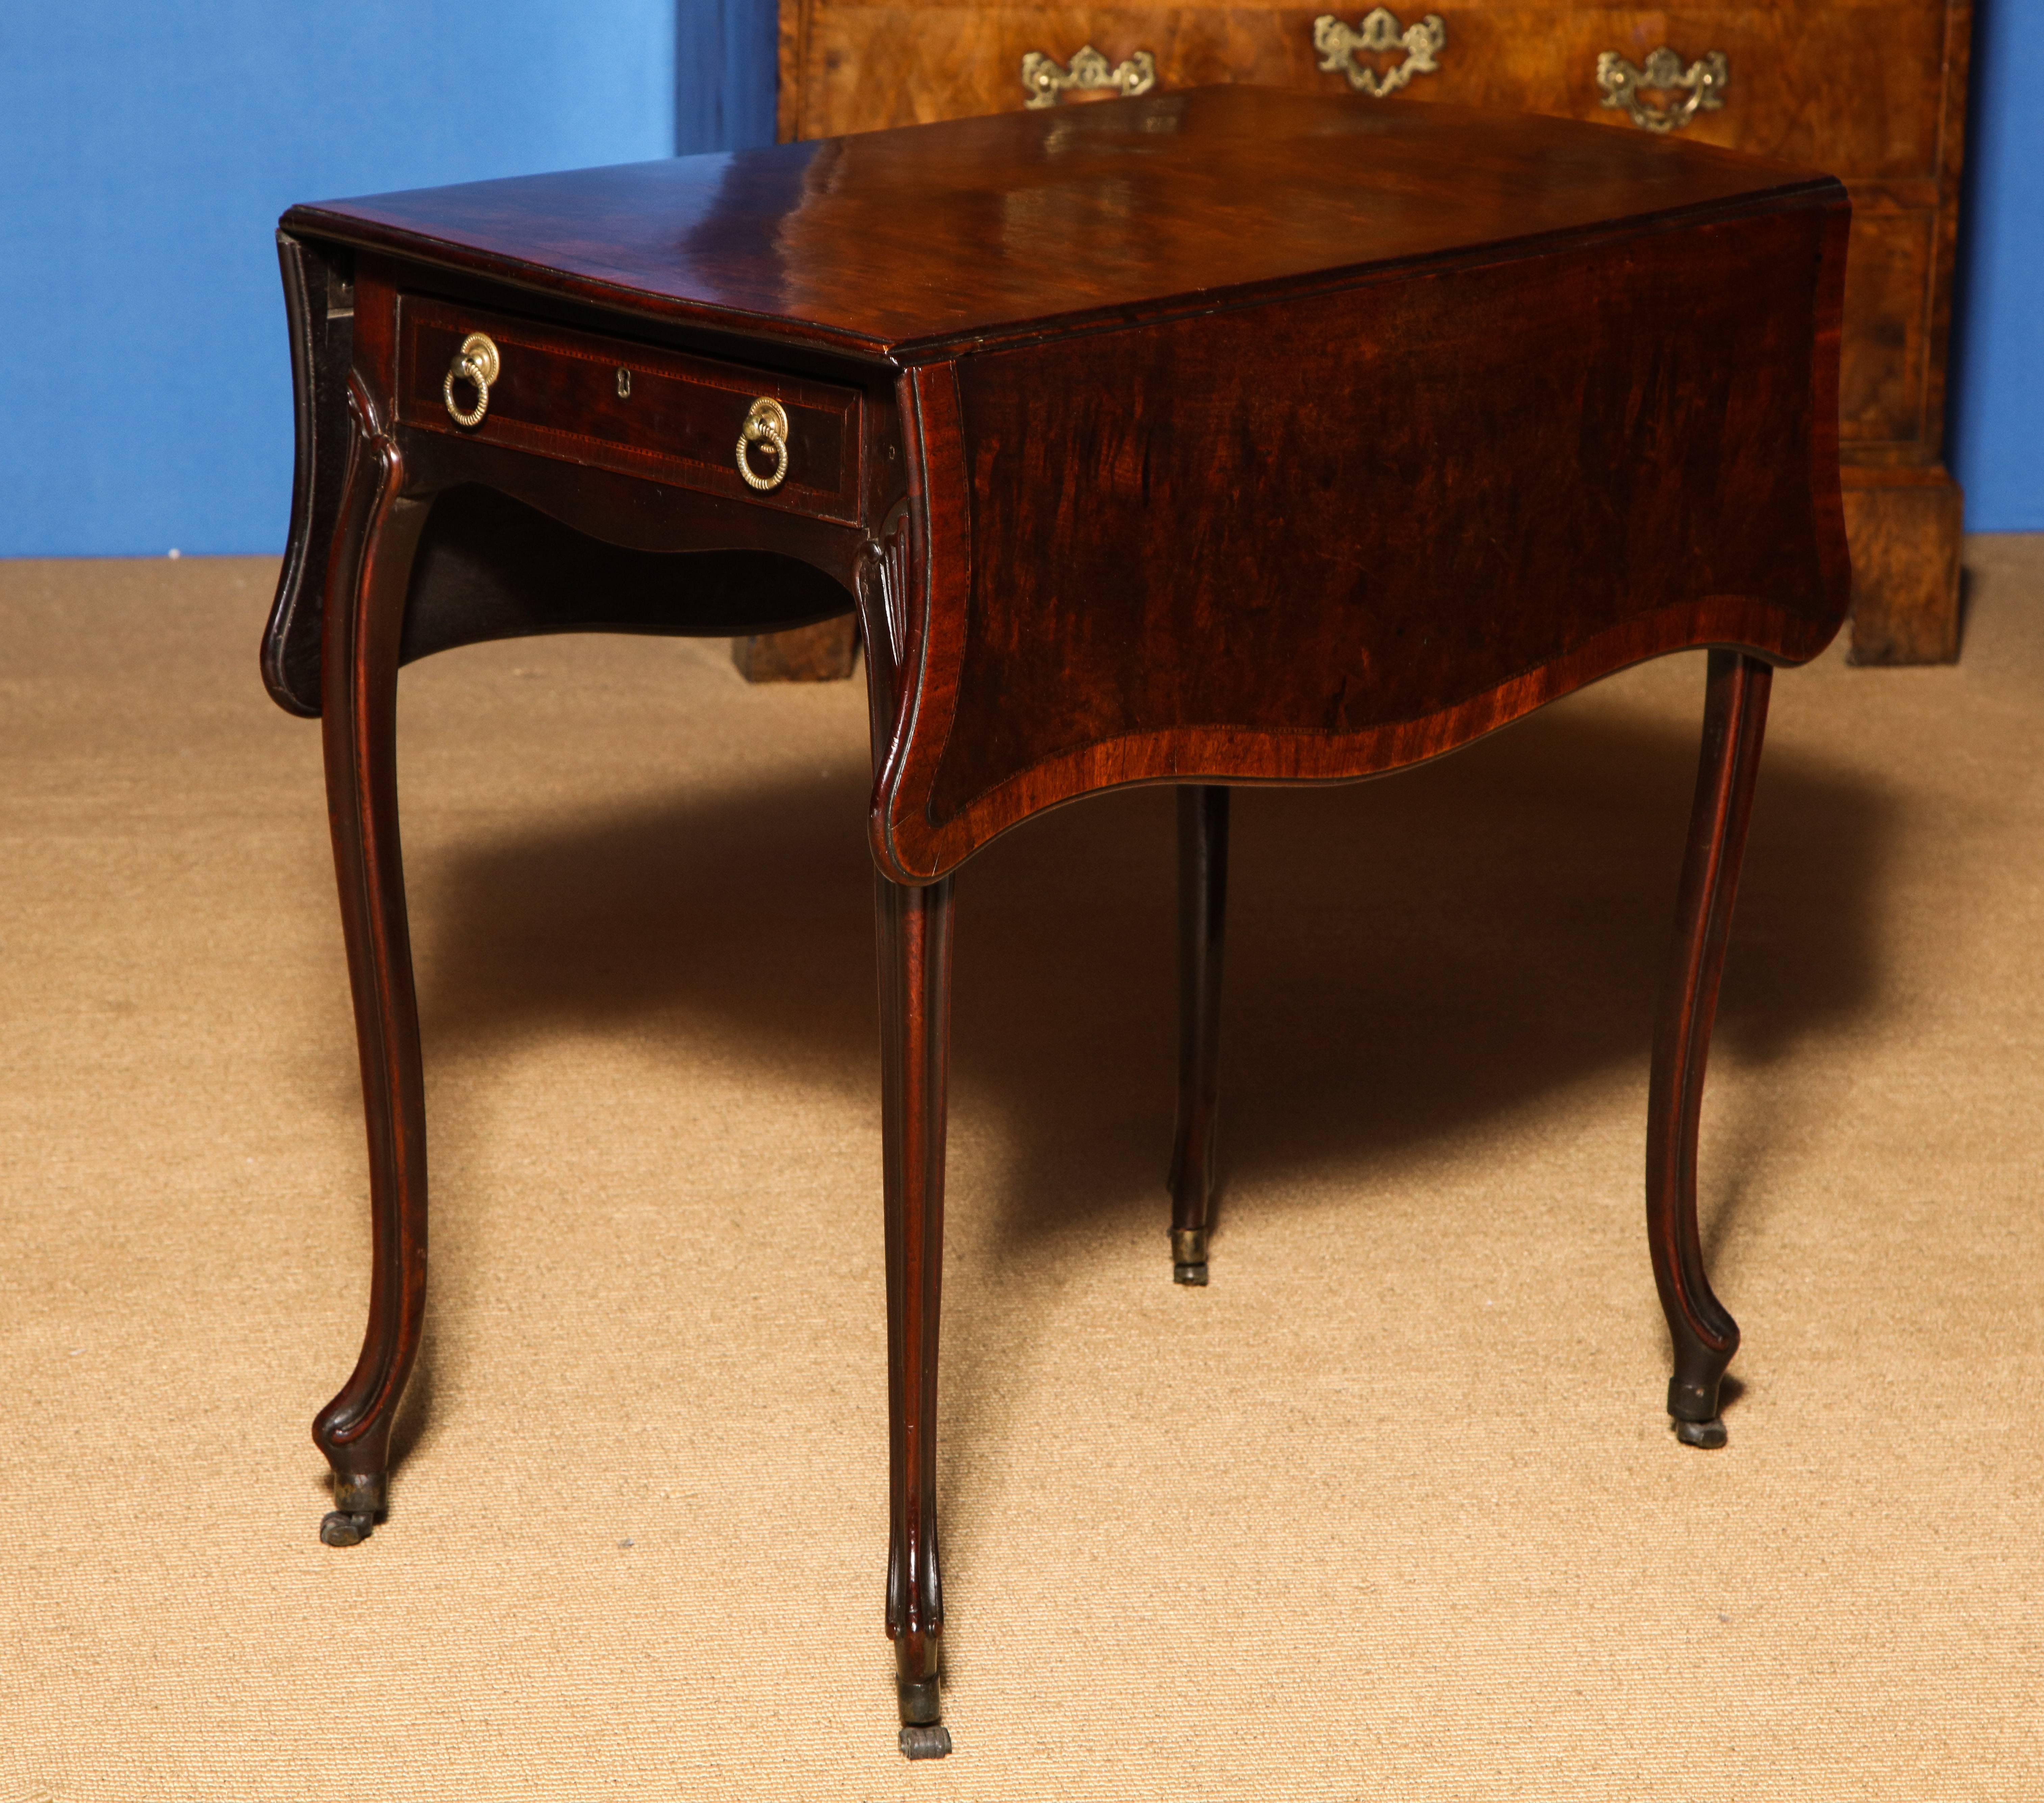 Hepplewhite French Taste Period Mahogany Pembroke Table, English, circa 1775 In Excellent Condition For Sale In New York, NY